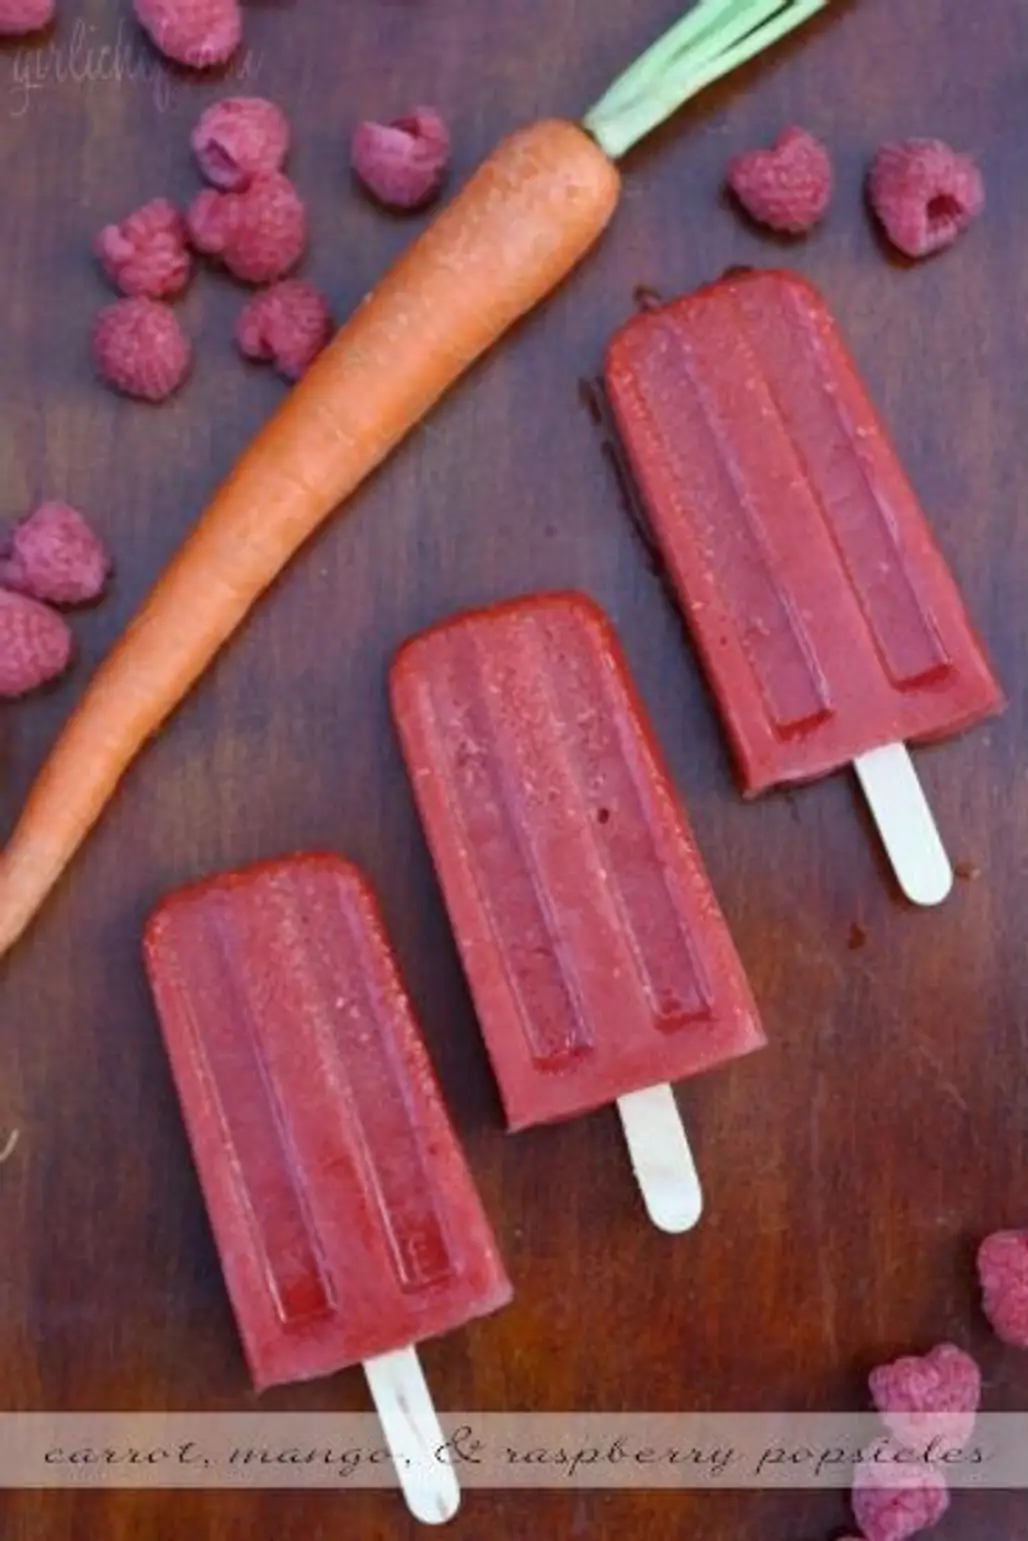 Carrot, Mango, and Raspberry Popsicle